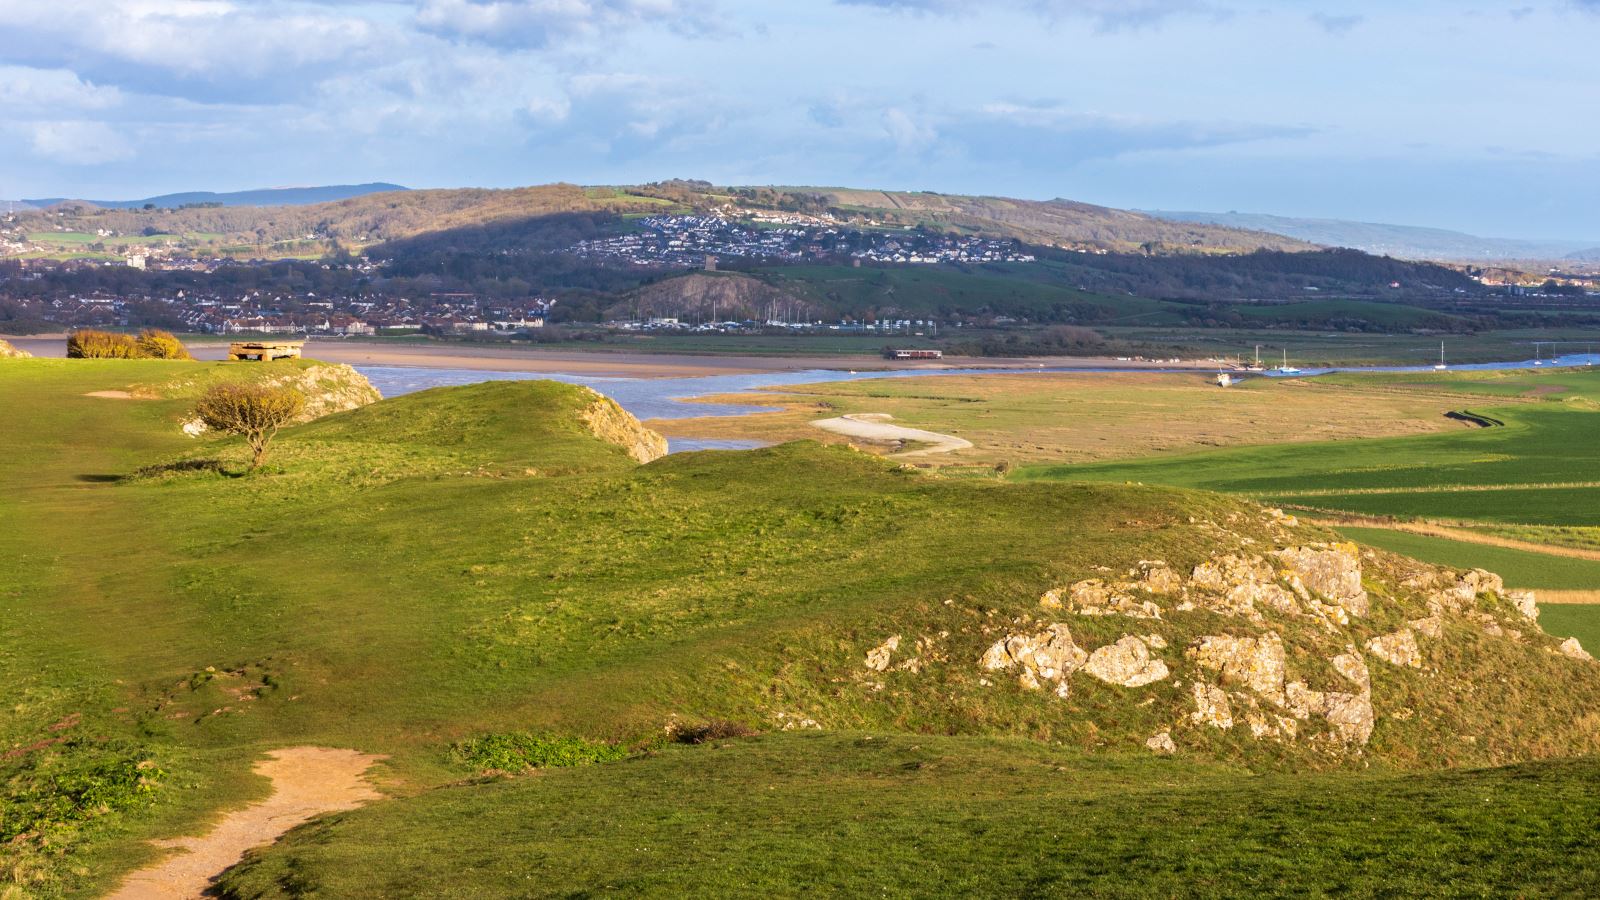 View from the top of a headland looking back inland with an estuary and hills in the background